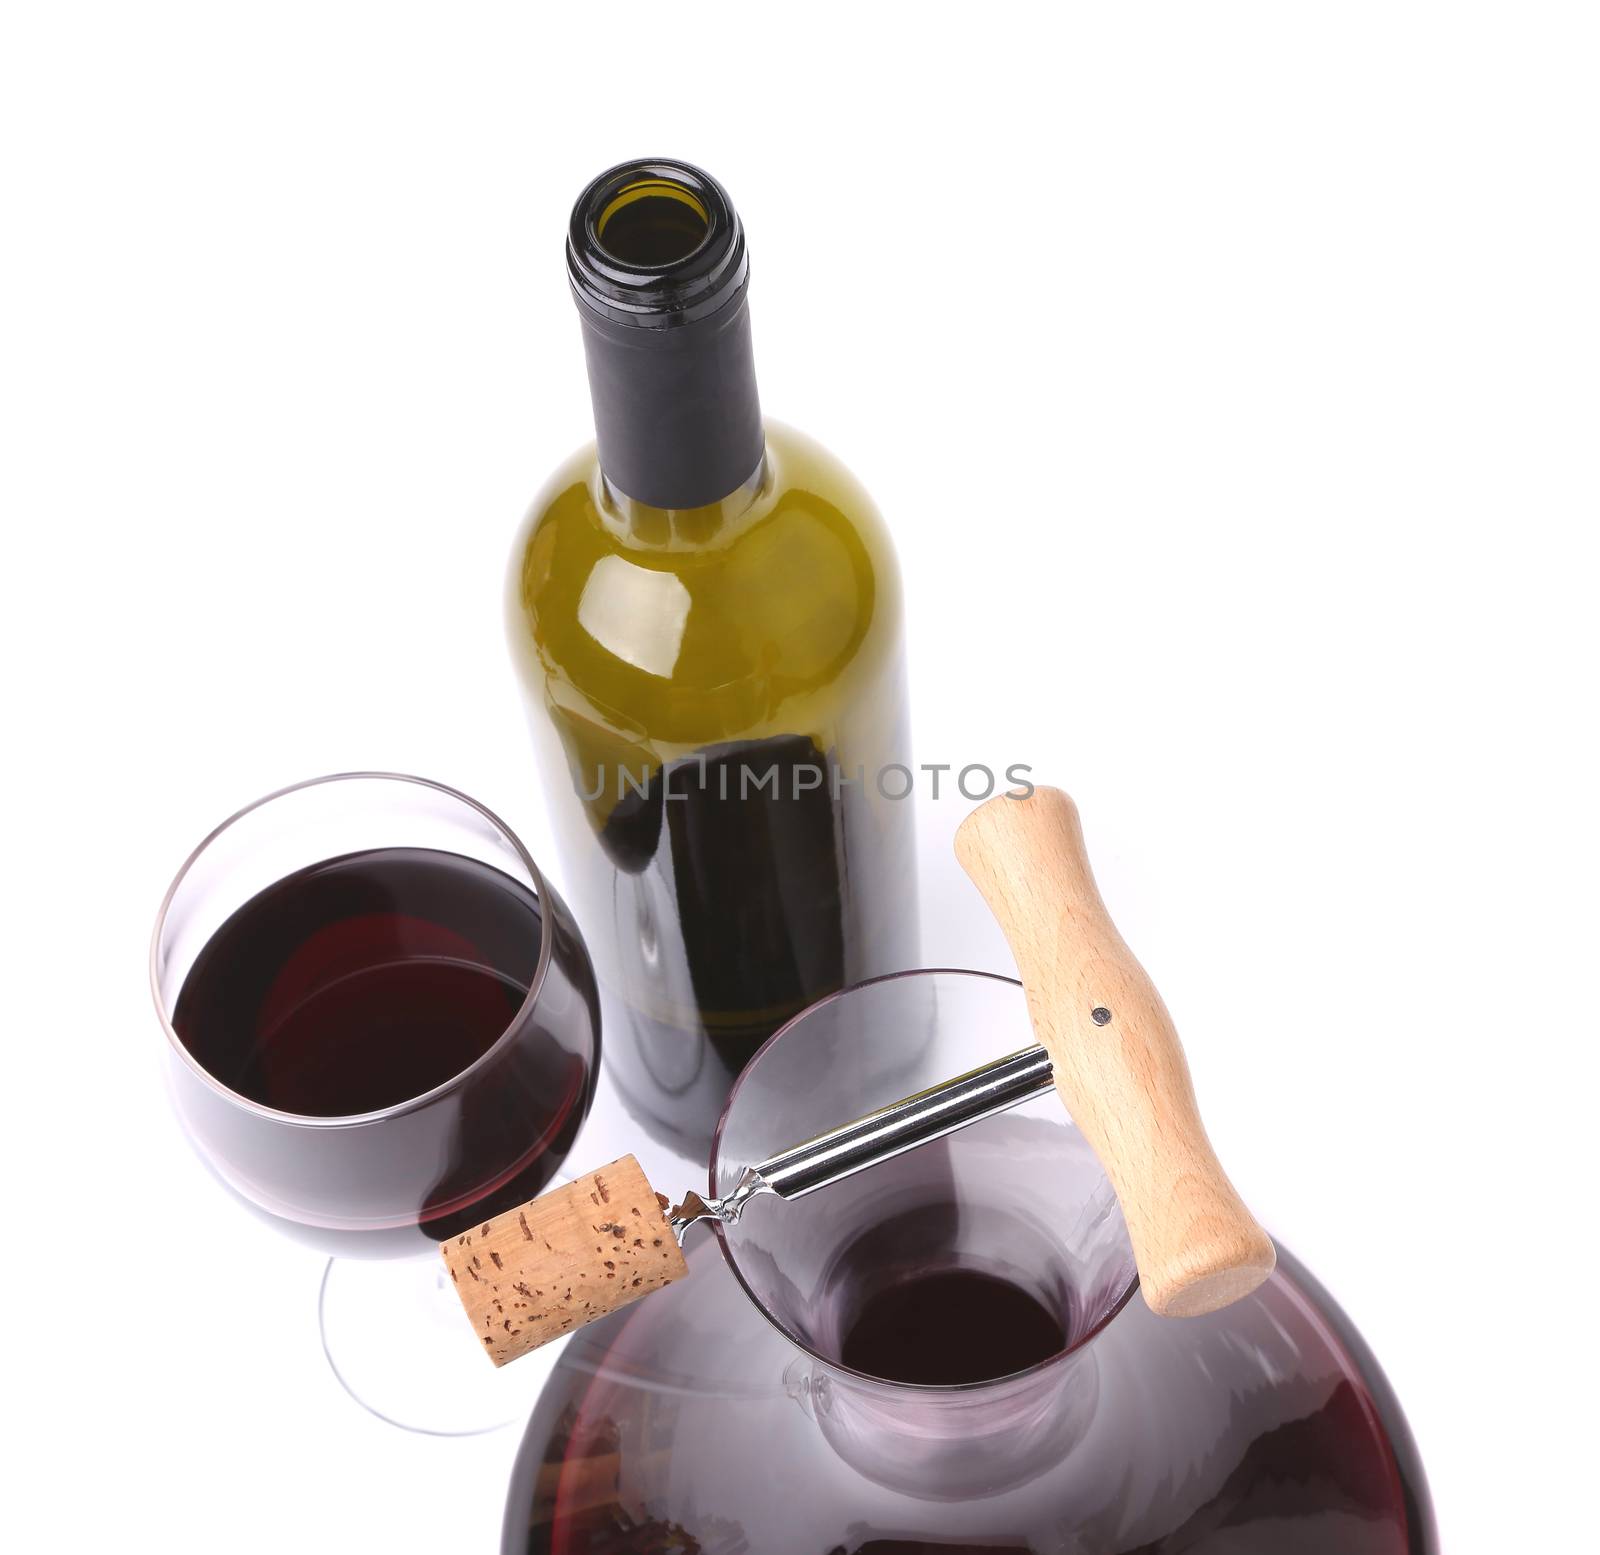 decanter, bottle and glass with red wine top view by indigolotos